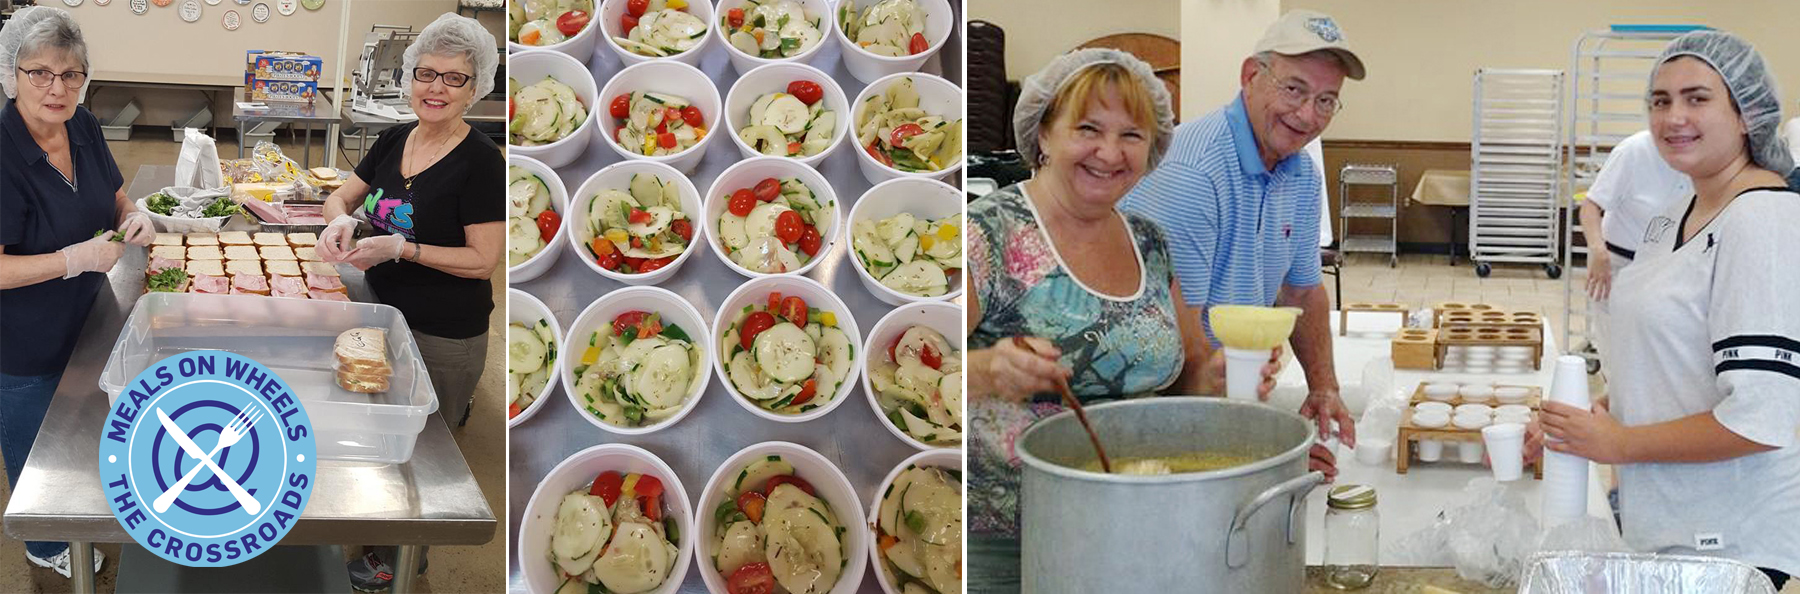 Photos of volunteers preparing meals and a photo of cucumber salad